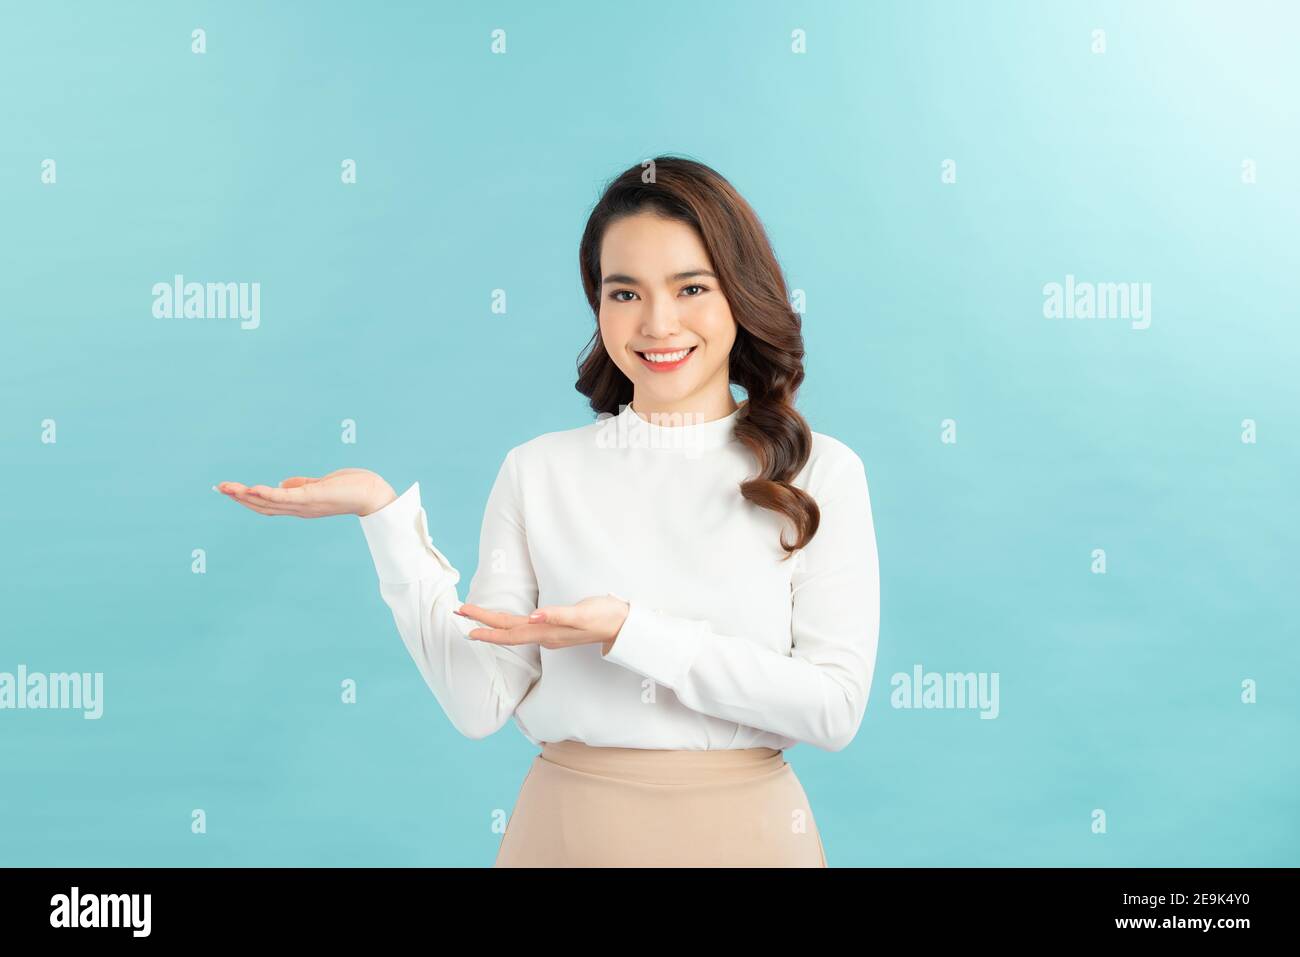 Young attractive woman in casual wear shows her palm and smiling Stock Photo